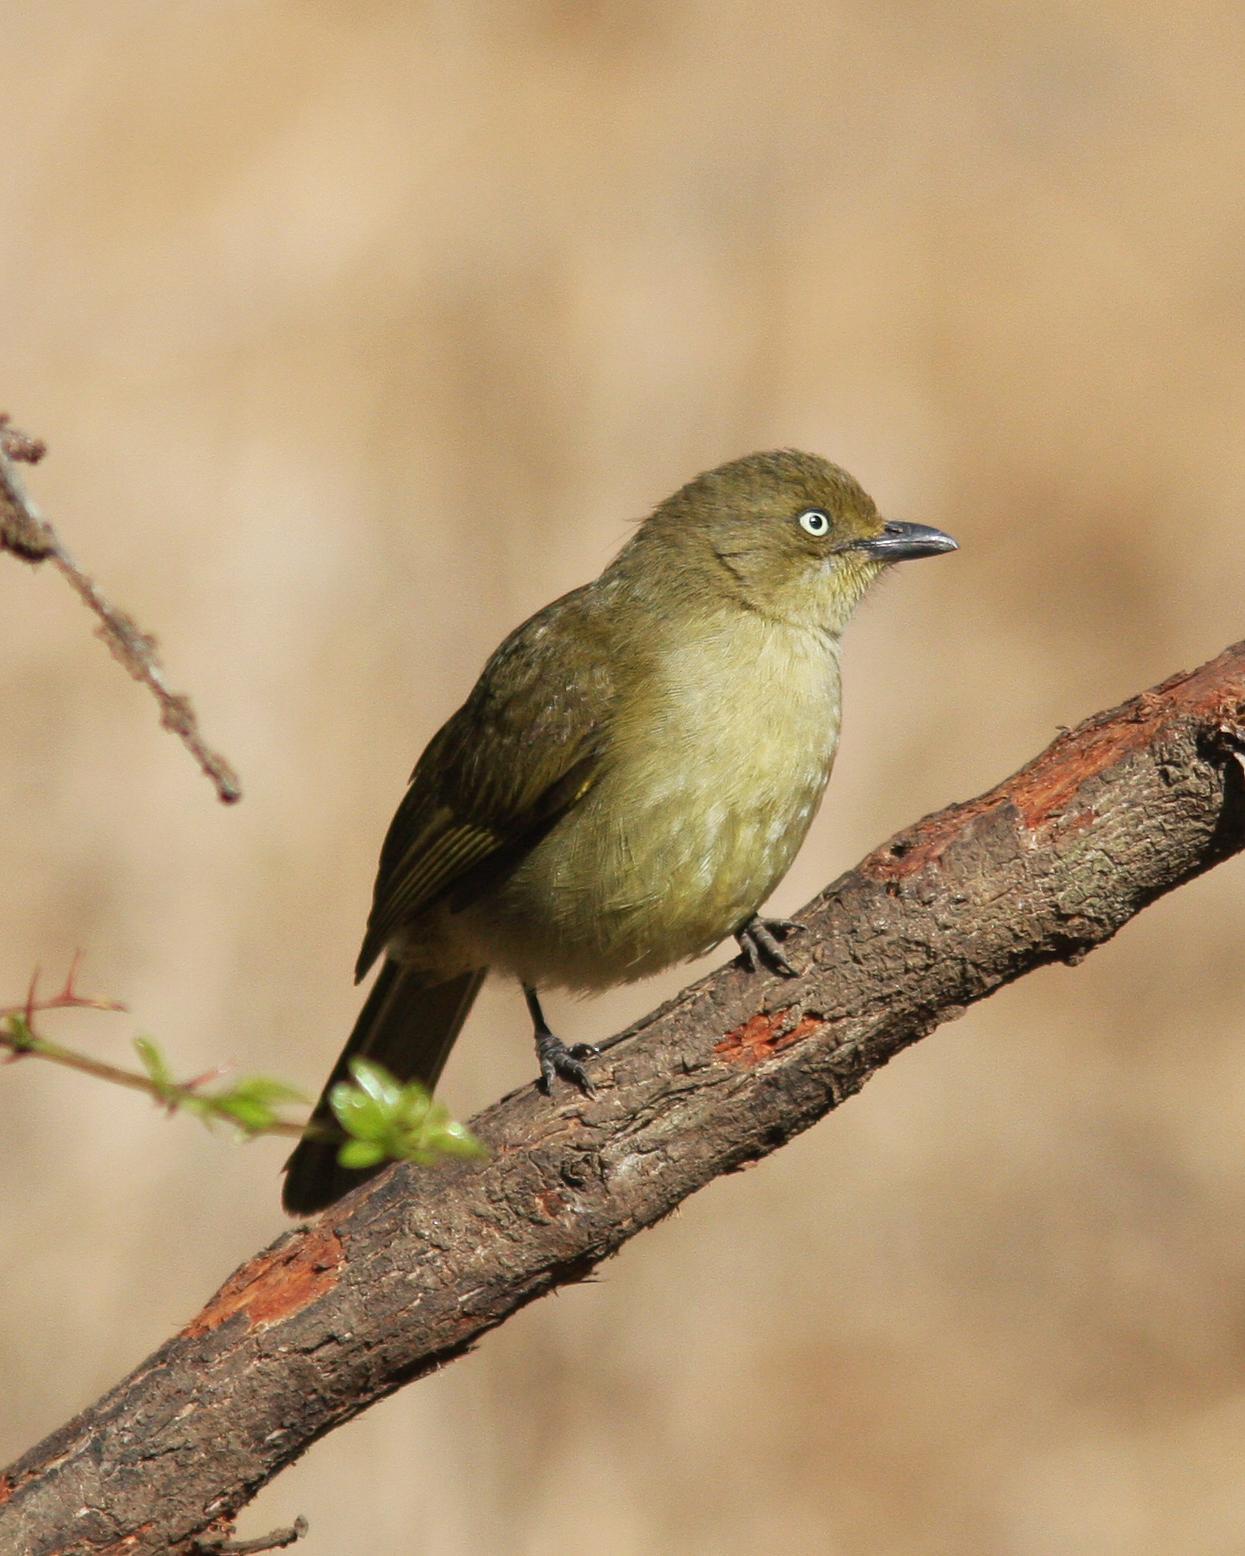 Sombre Greenbul Photo by Henk Baptist